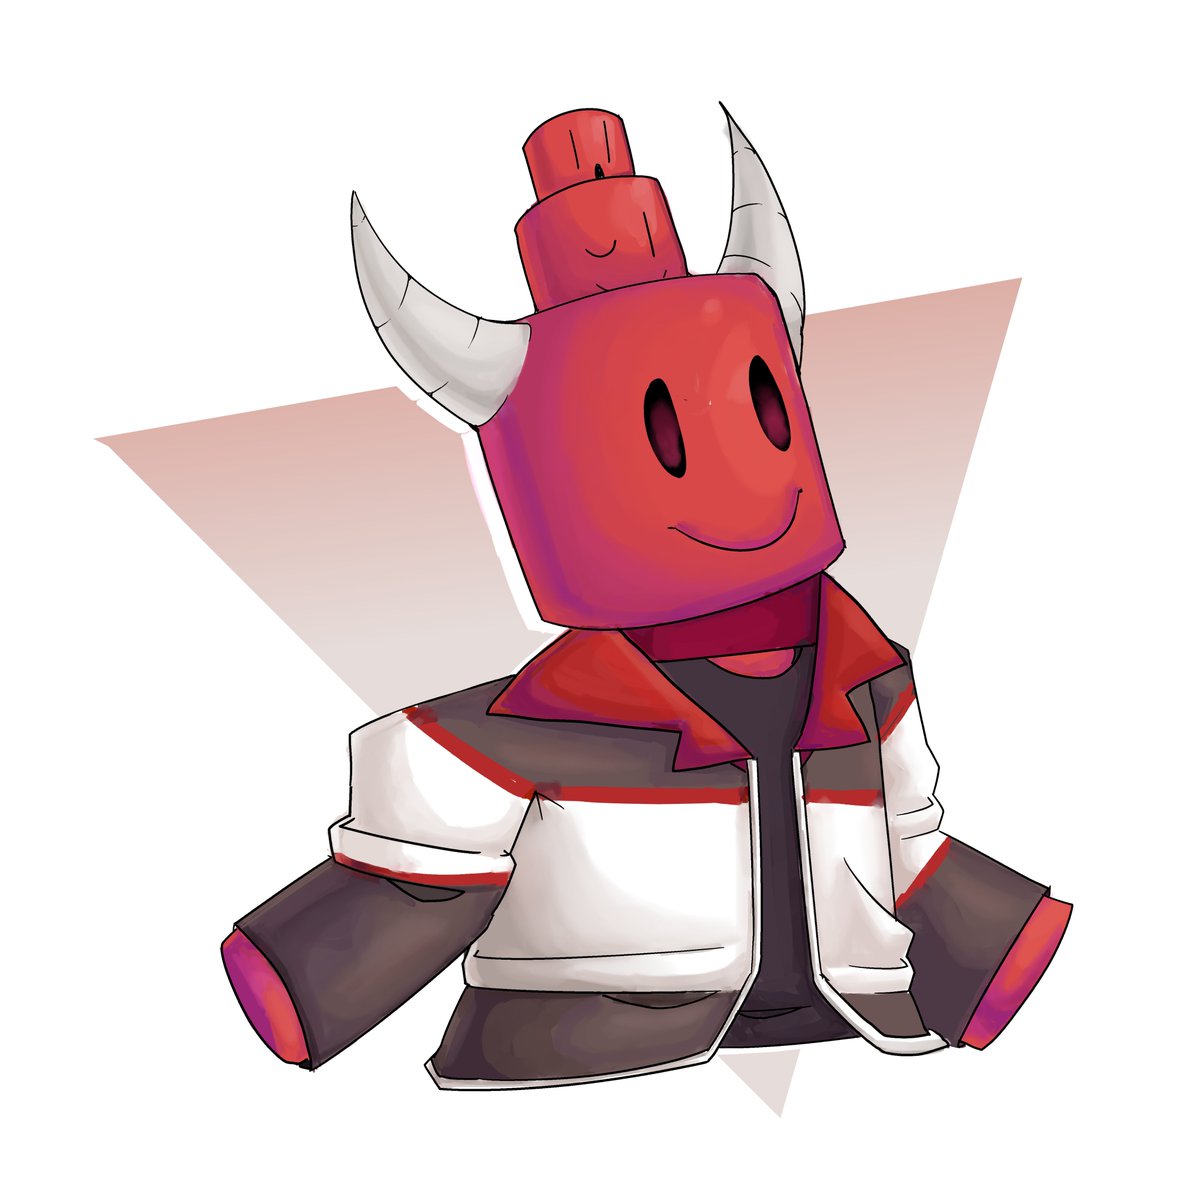 Spooky Cyclops On Twitter Roblox Art Giveaway There Will Be One Winner And It Ll End On 7th April The Winner Will Get A Custom Profile Picture Of Their Roblox Avatar Drawn - art roblox avatar roblox profile picture